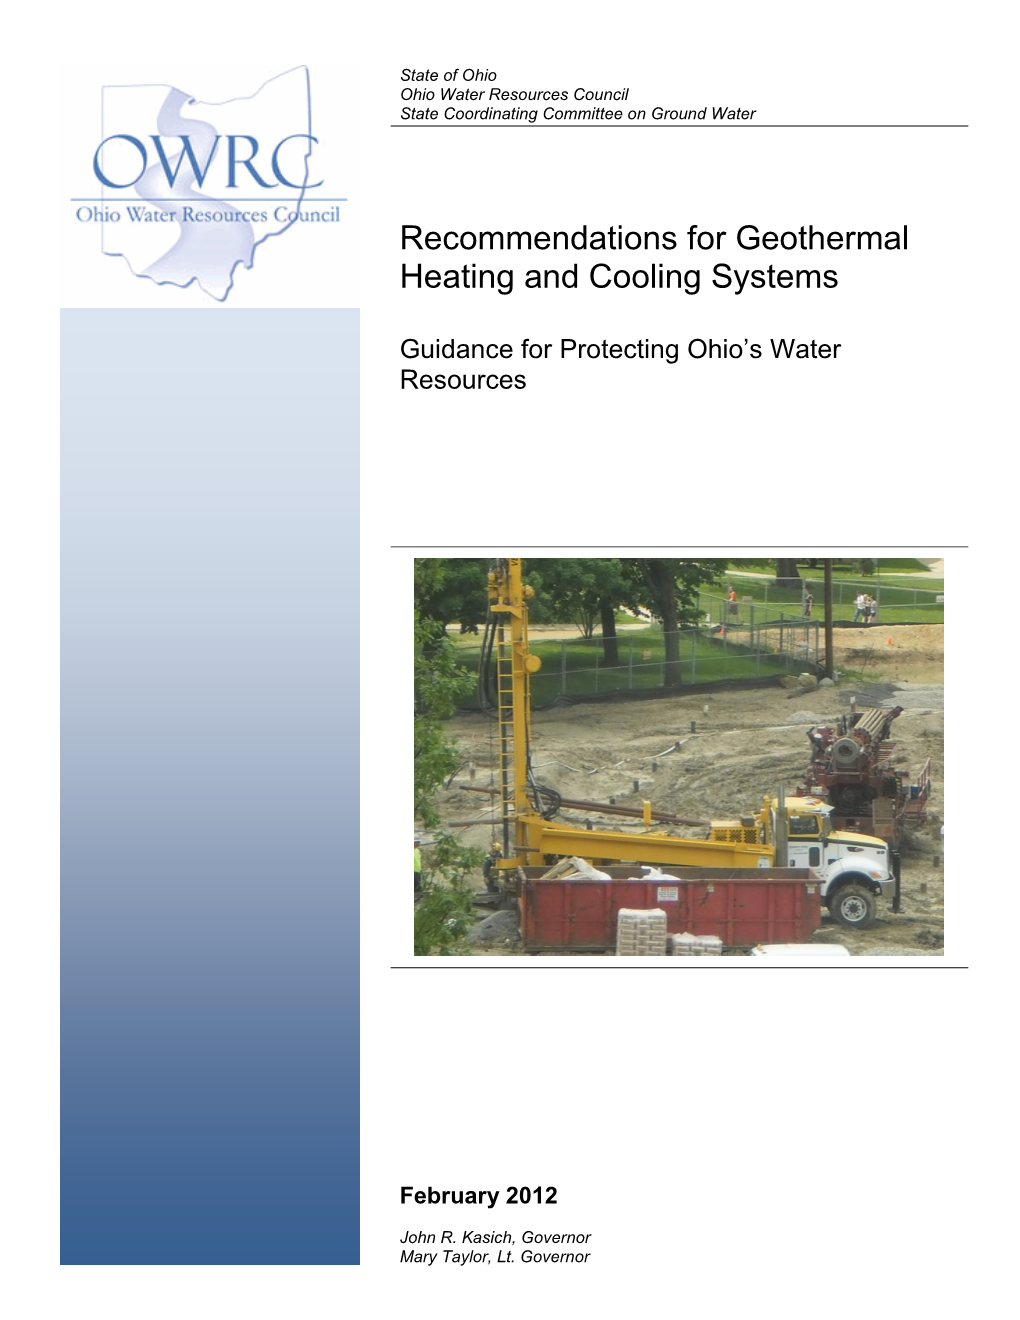 Recommendations for Geothermal Heating and Cooling Systems in Ohio